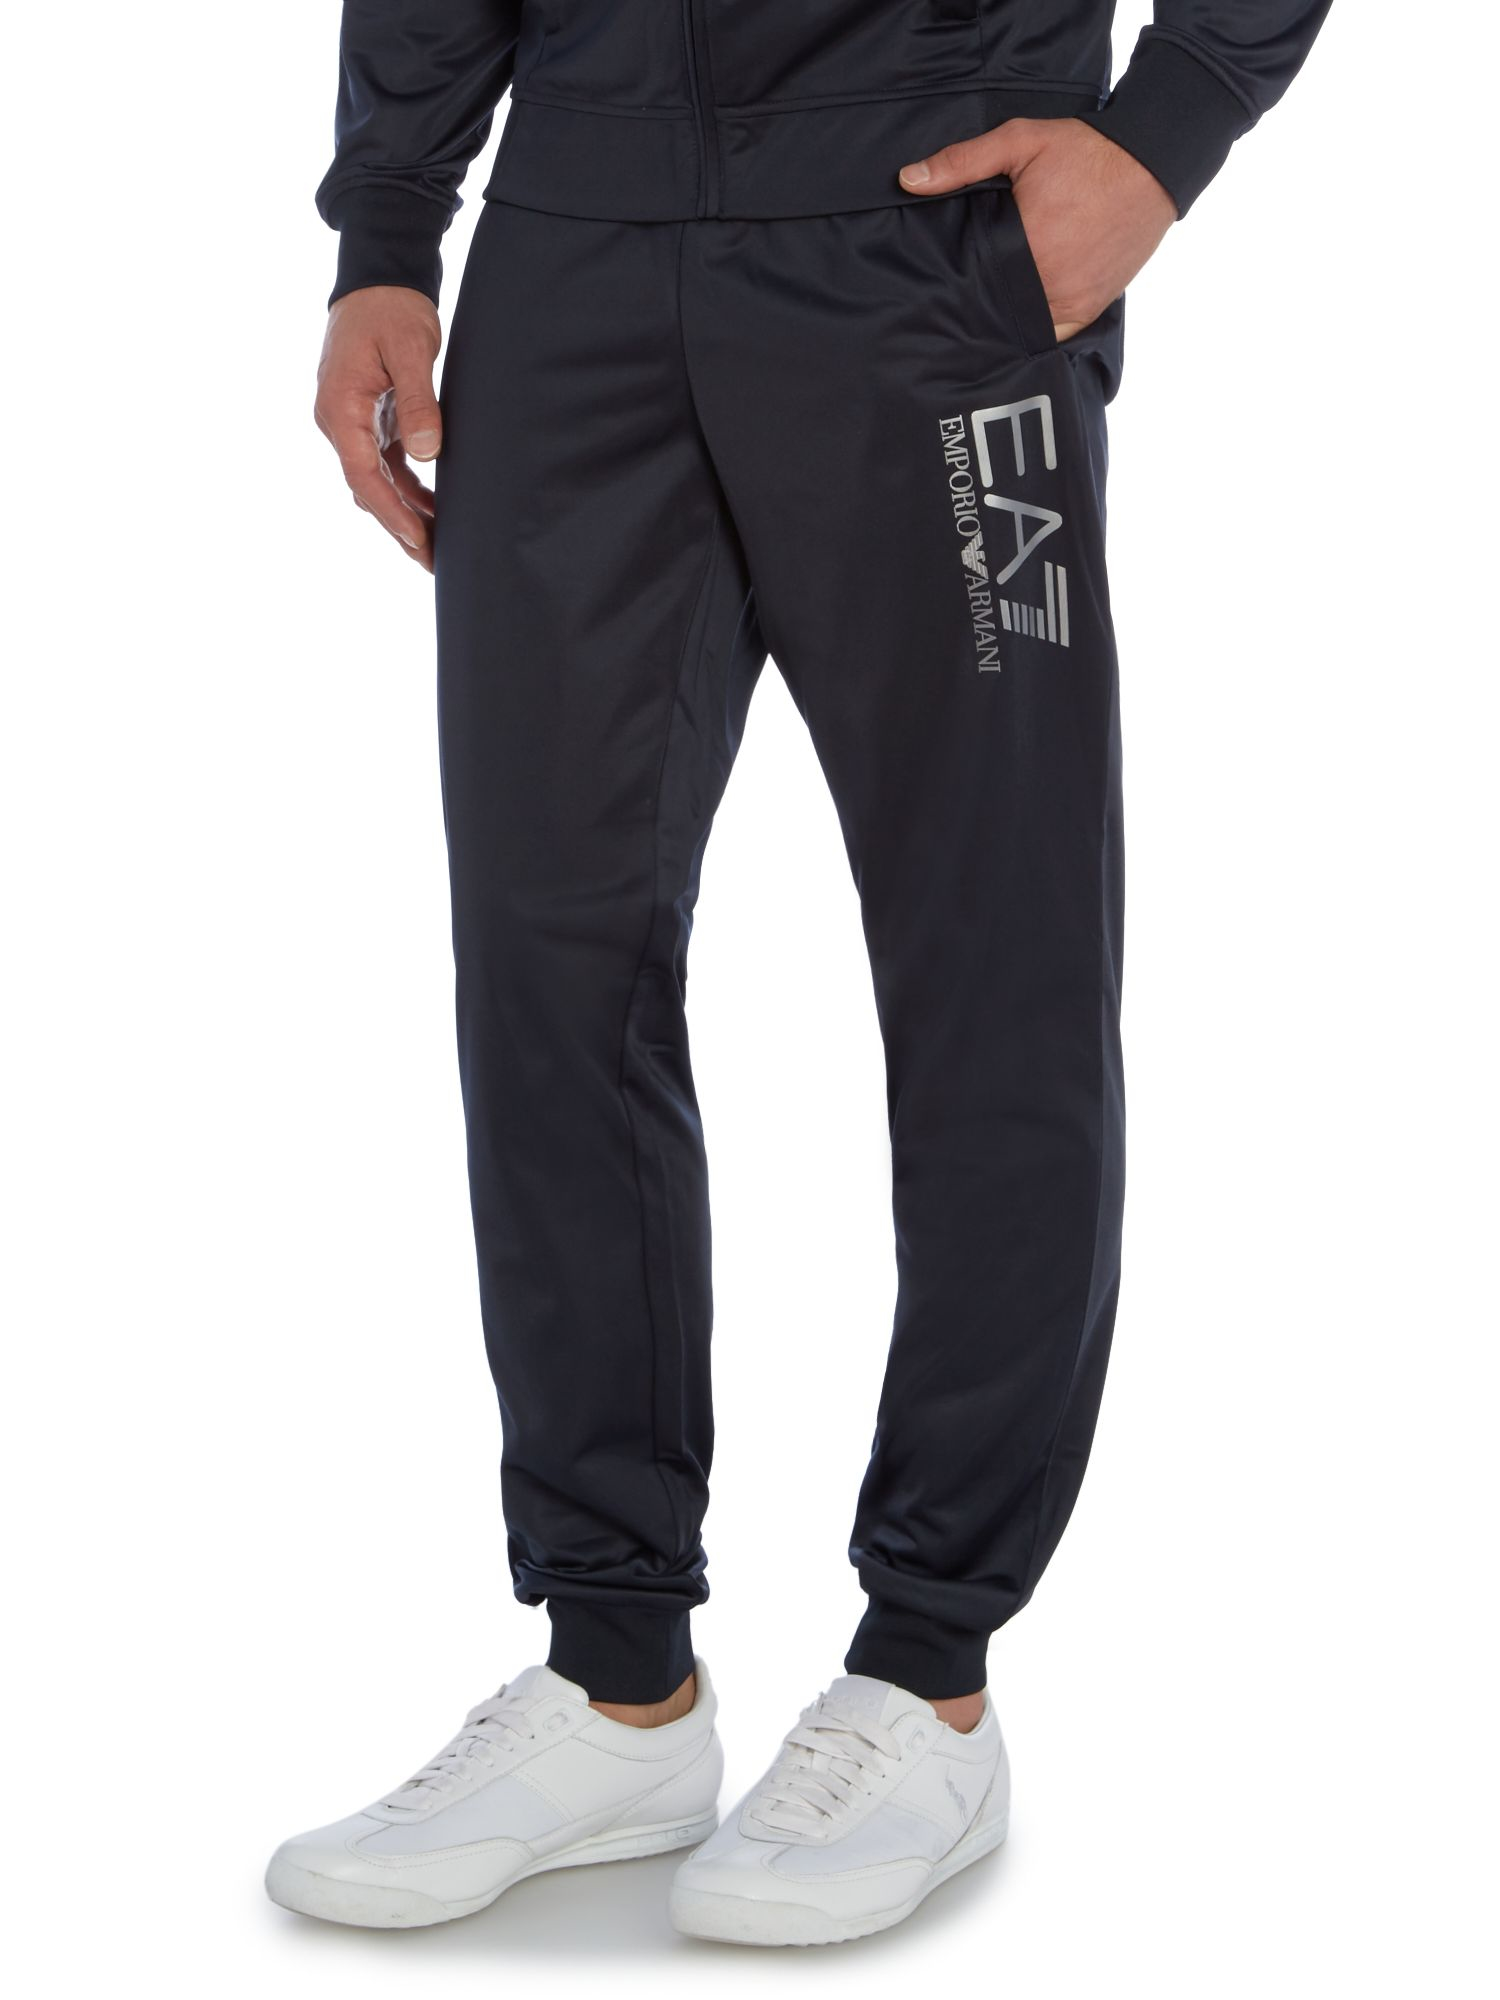 EA7 Plain Tracksuit With Zip Fastening in Navy (Blue) for Men - Lyst